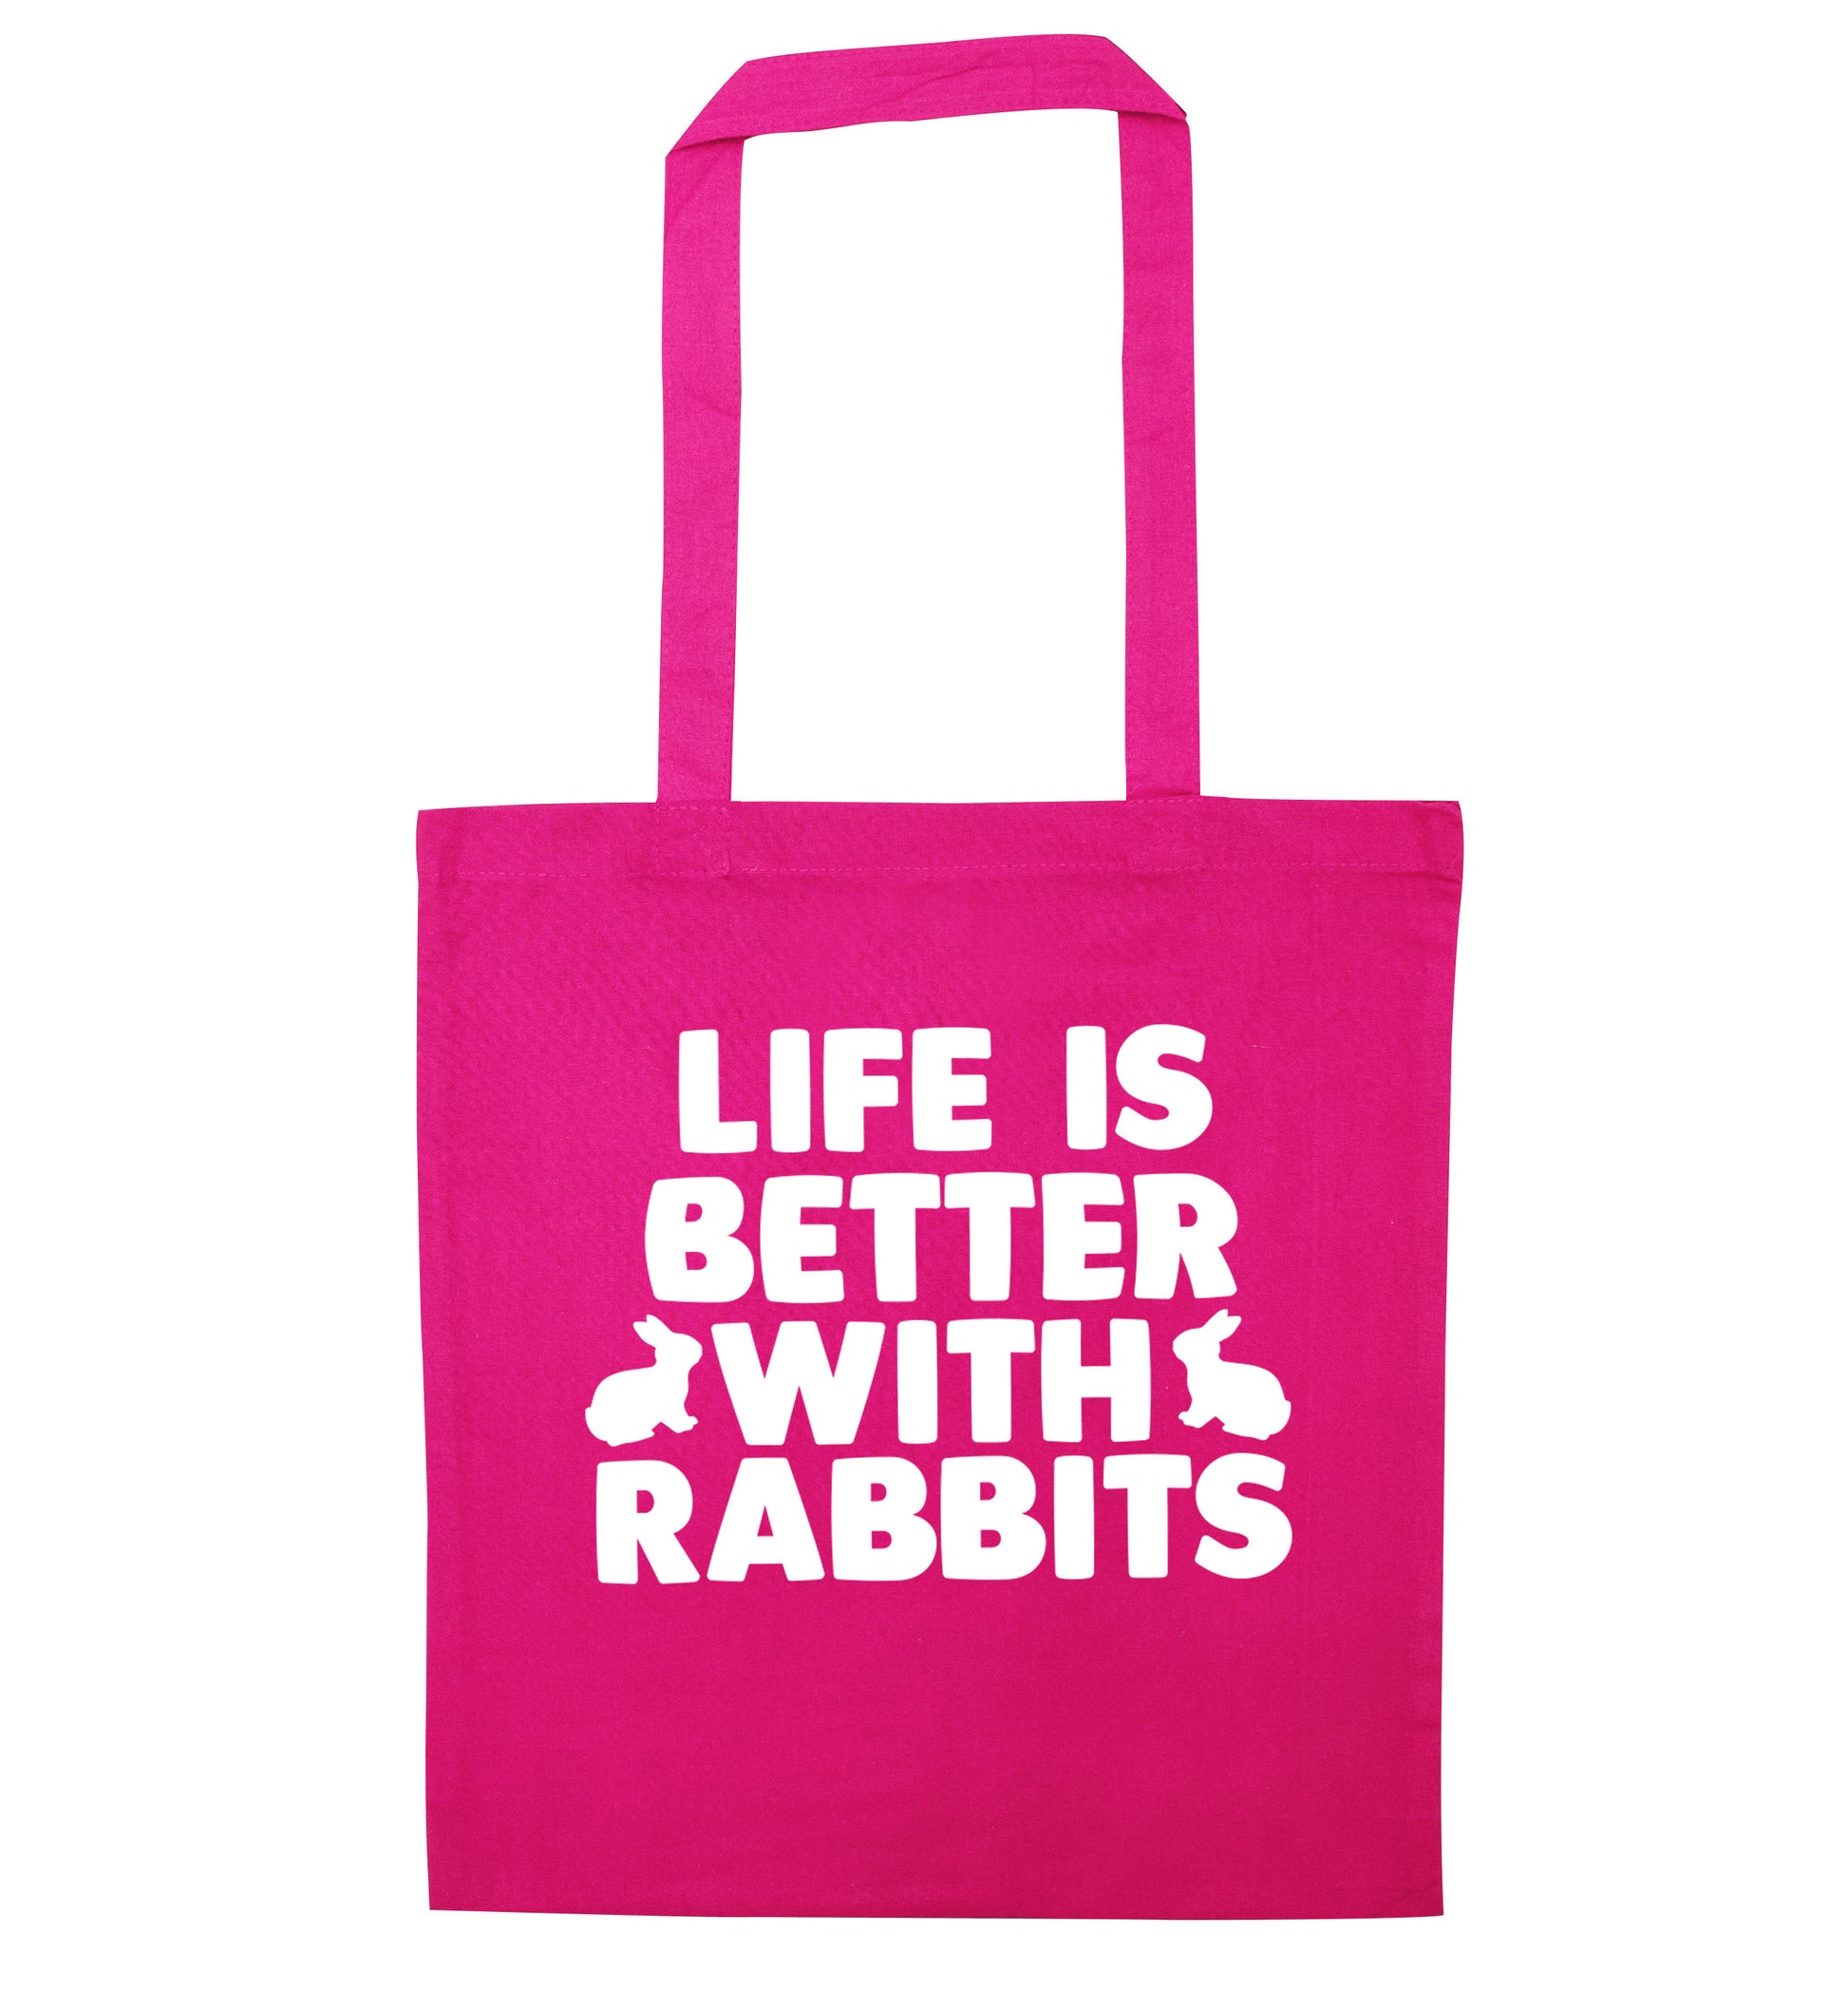 Life is better with rabbits pink tote bag